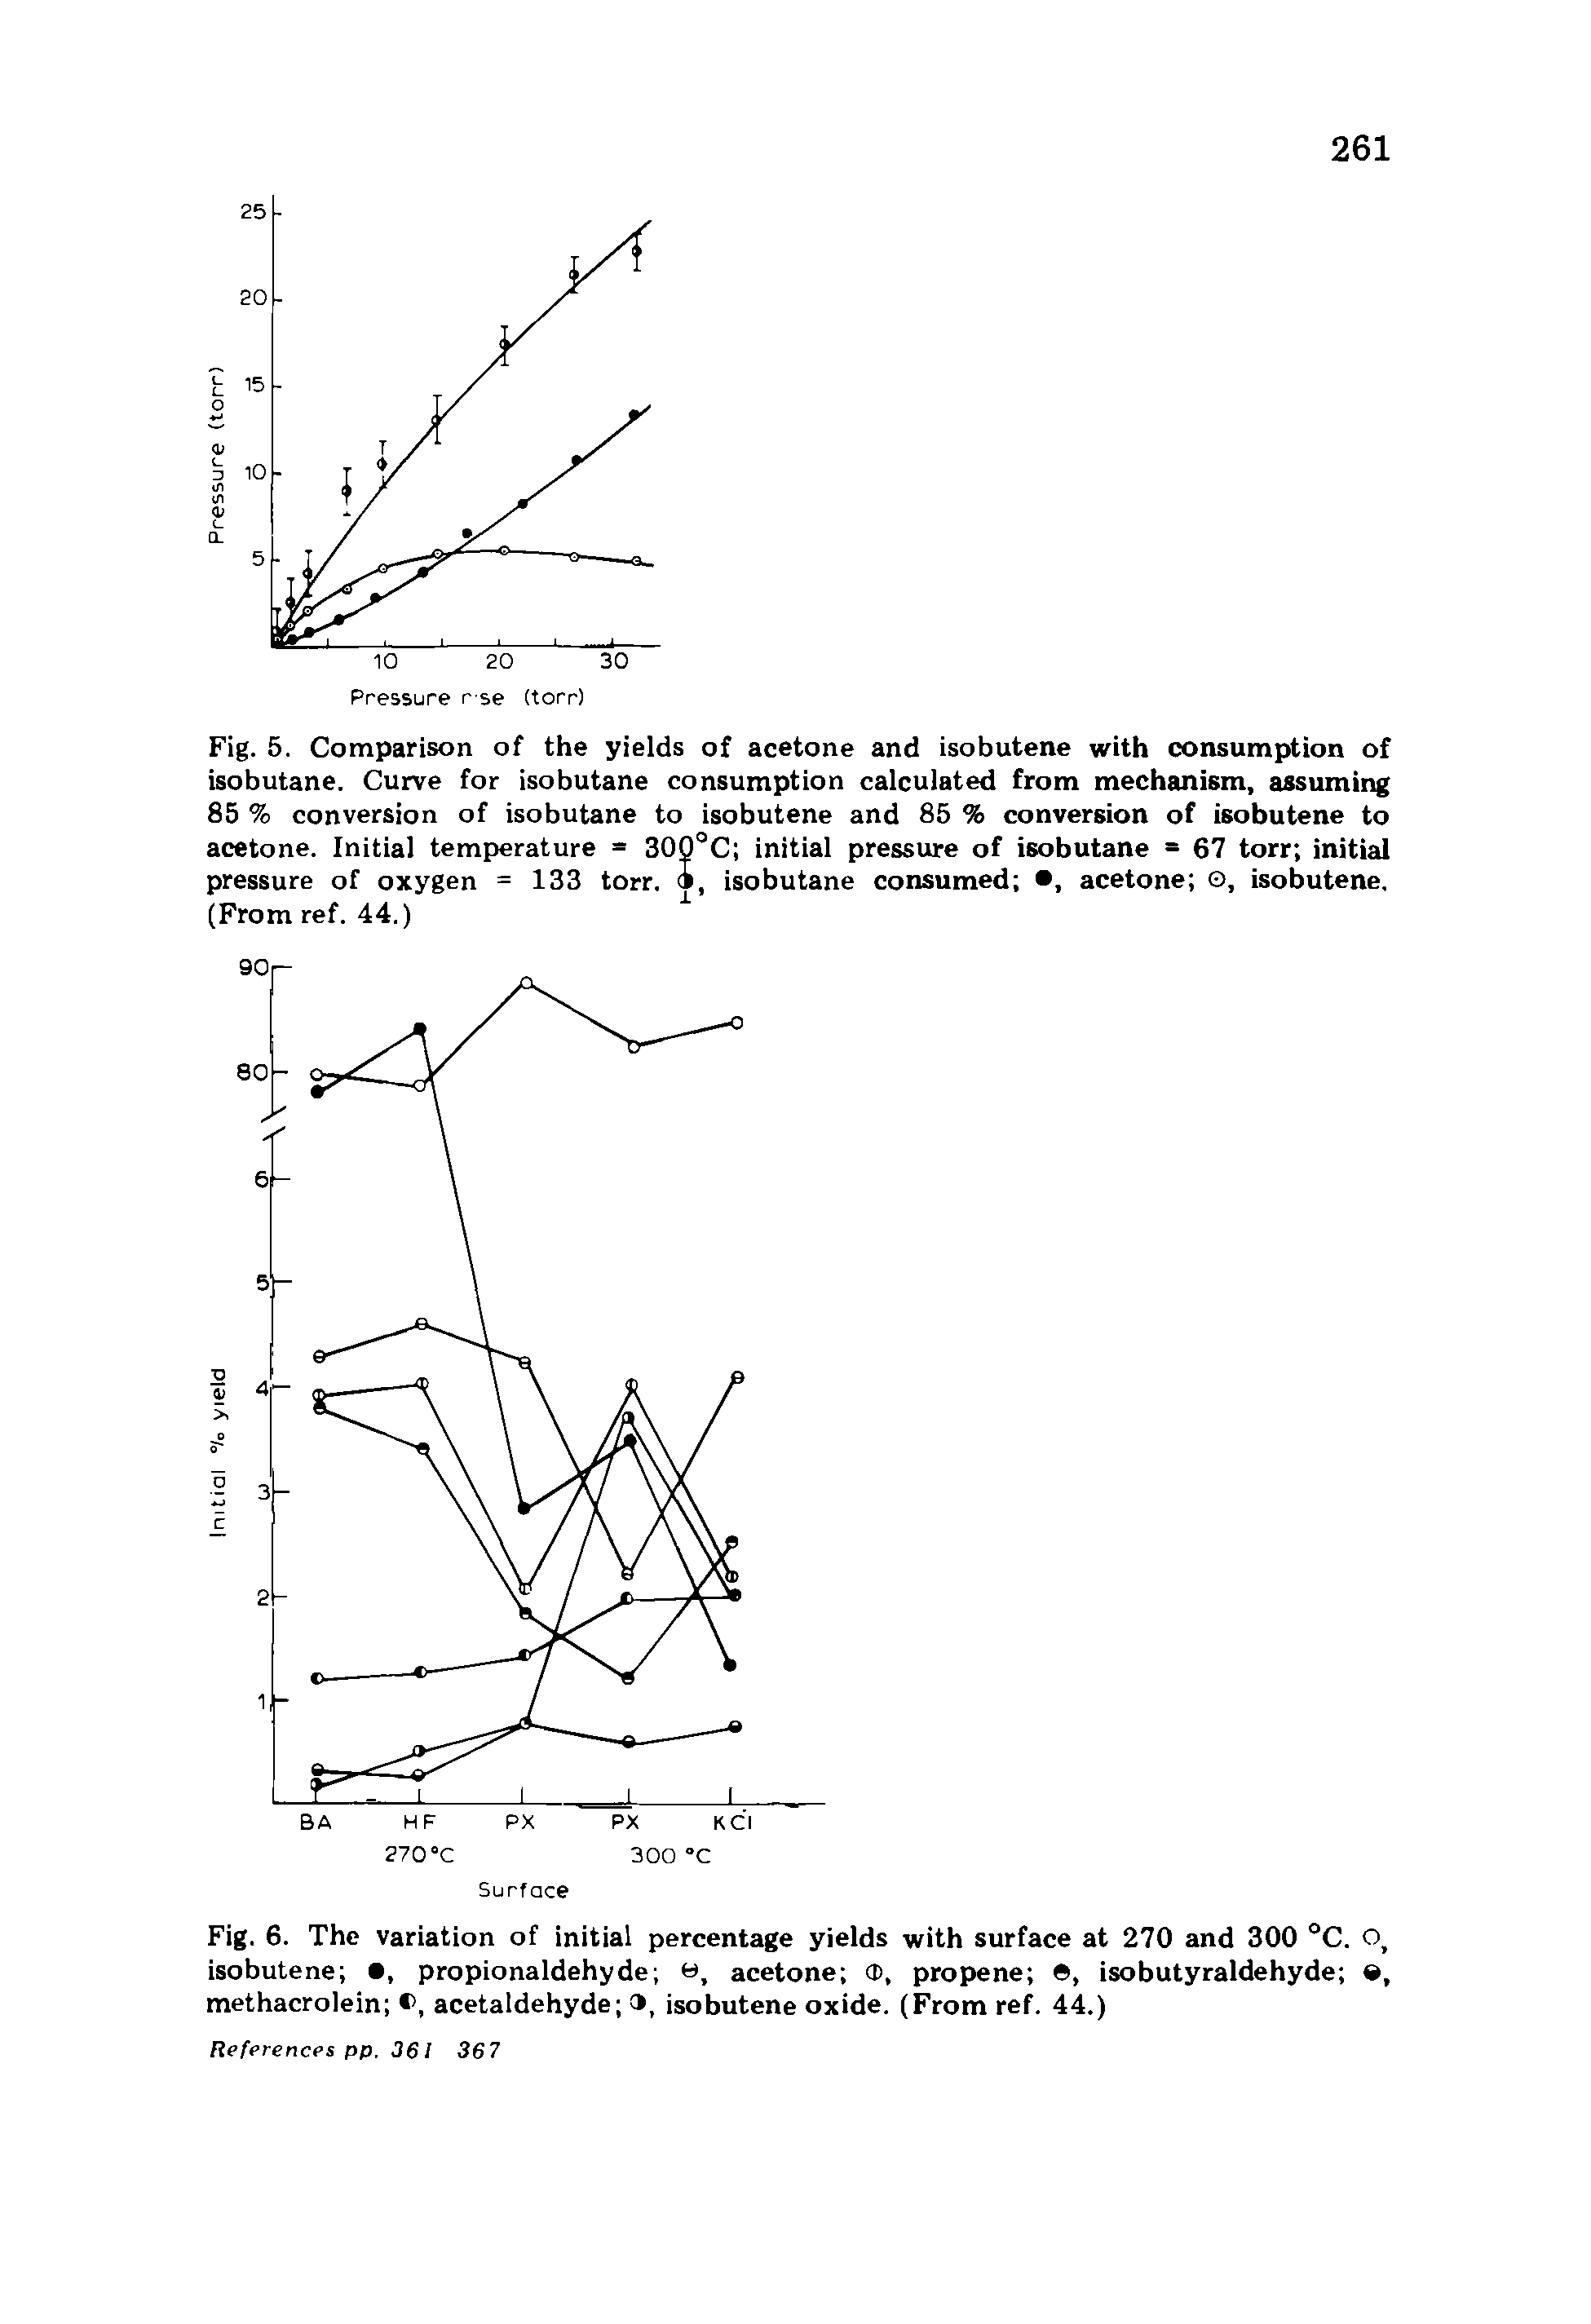 Fig. 6. The variation of initial percentage yields with surface at 270 and 300 °C. isobutene , propionaldehyde , acetone cp, propene 6, isobutyraldehyde , methacrolein >, acetaldehyde , isobutene oxide. (From ref. 44.)...